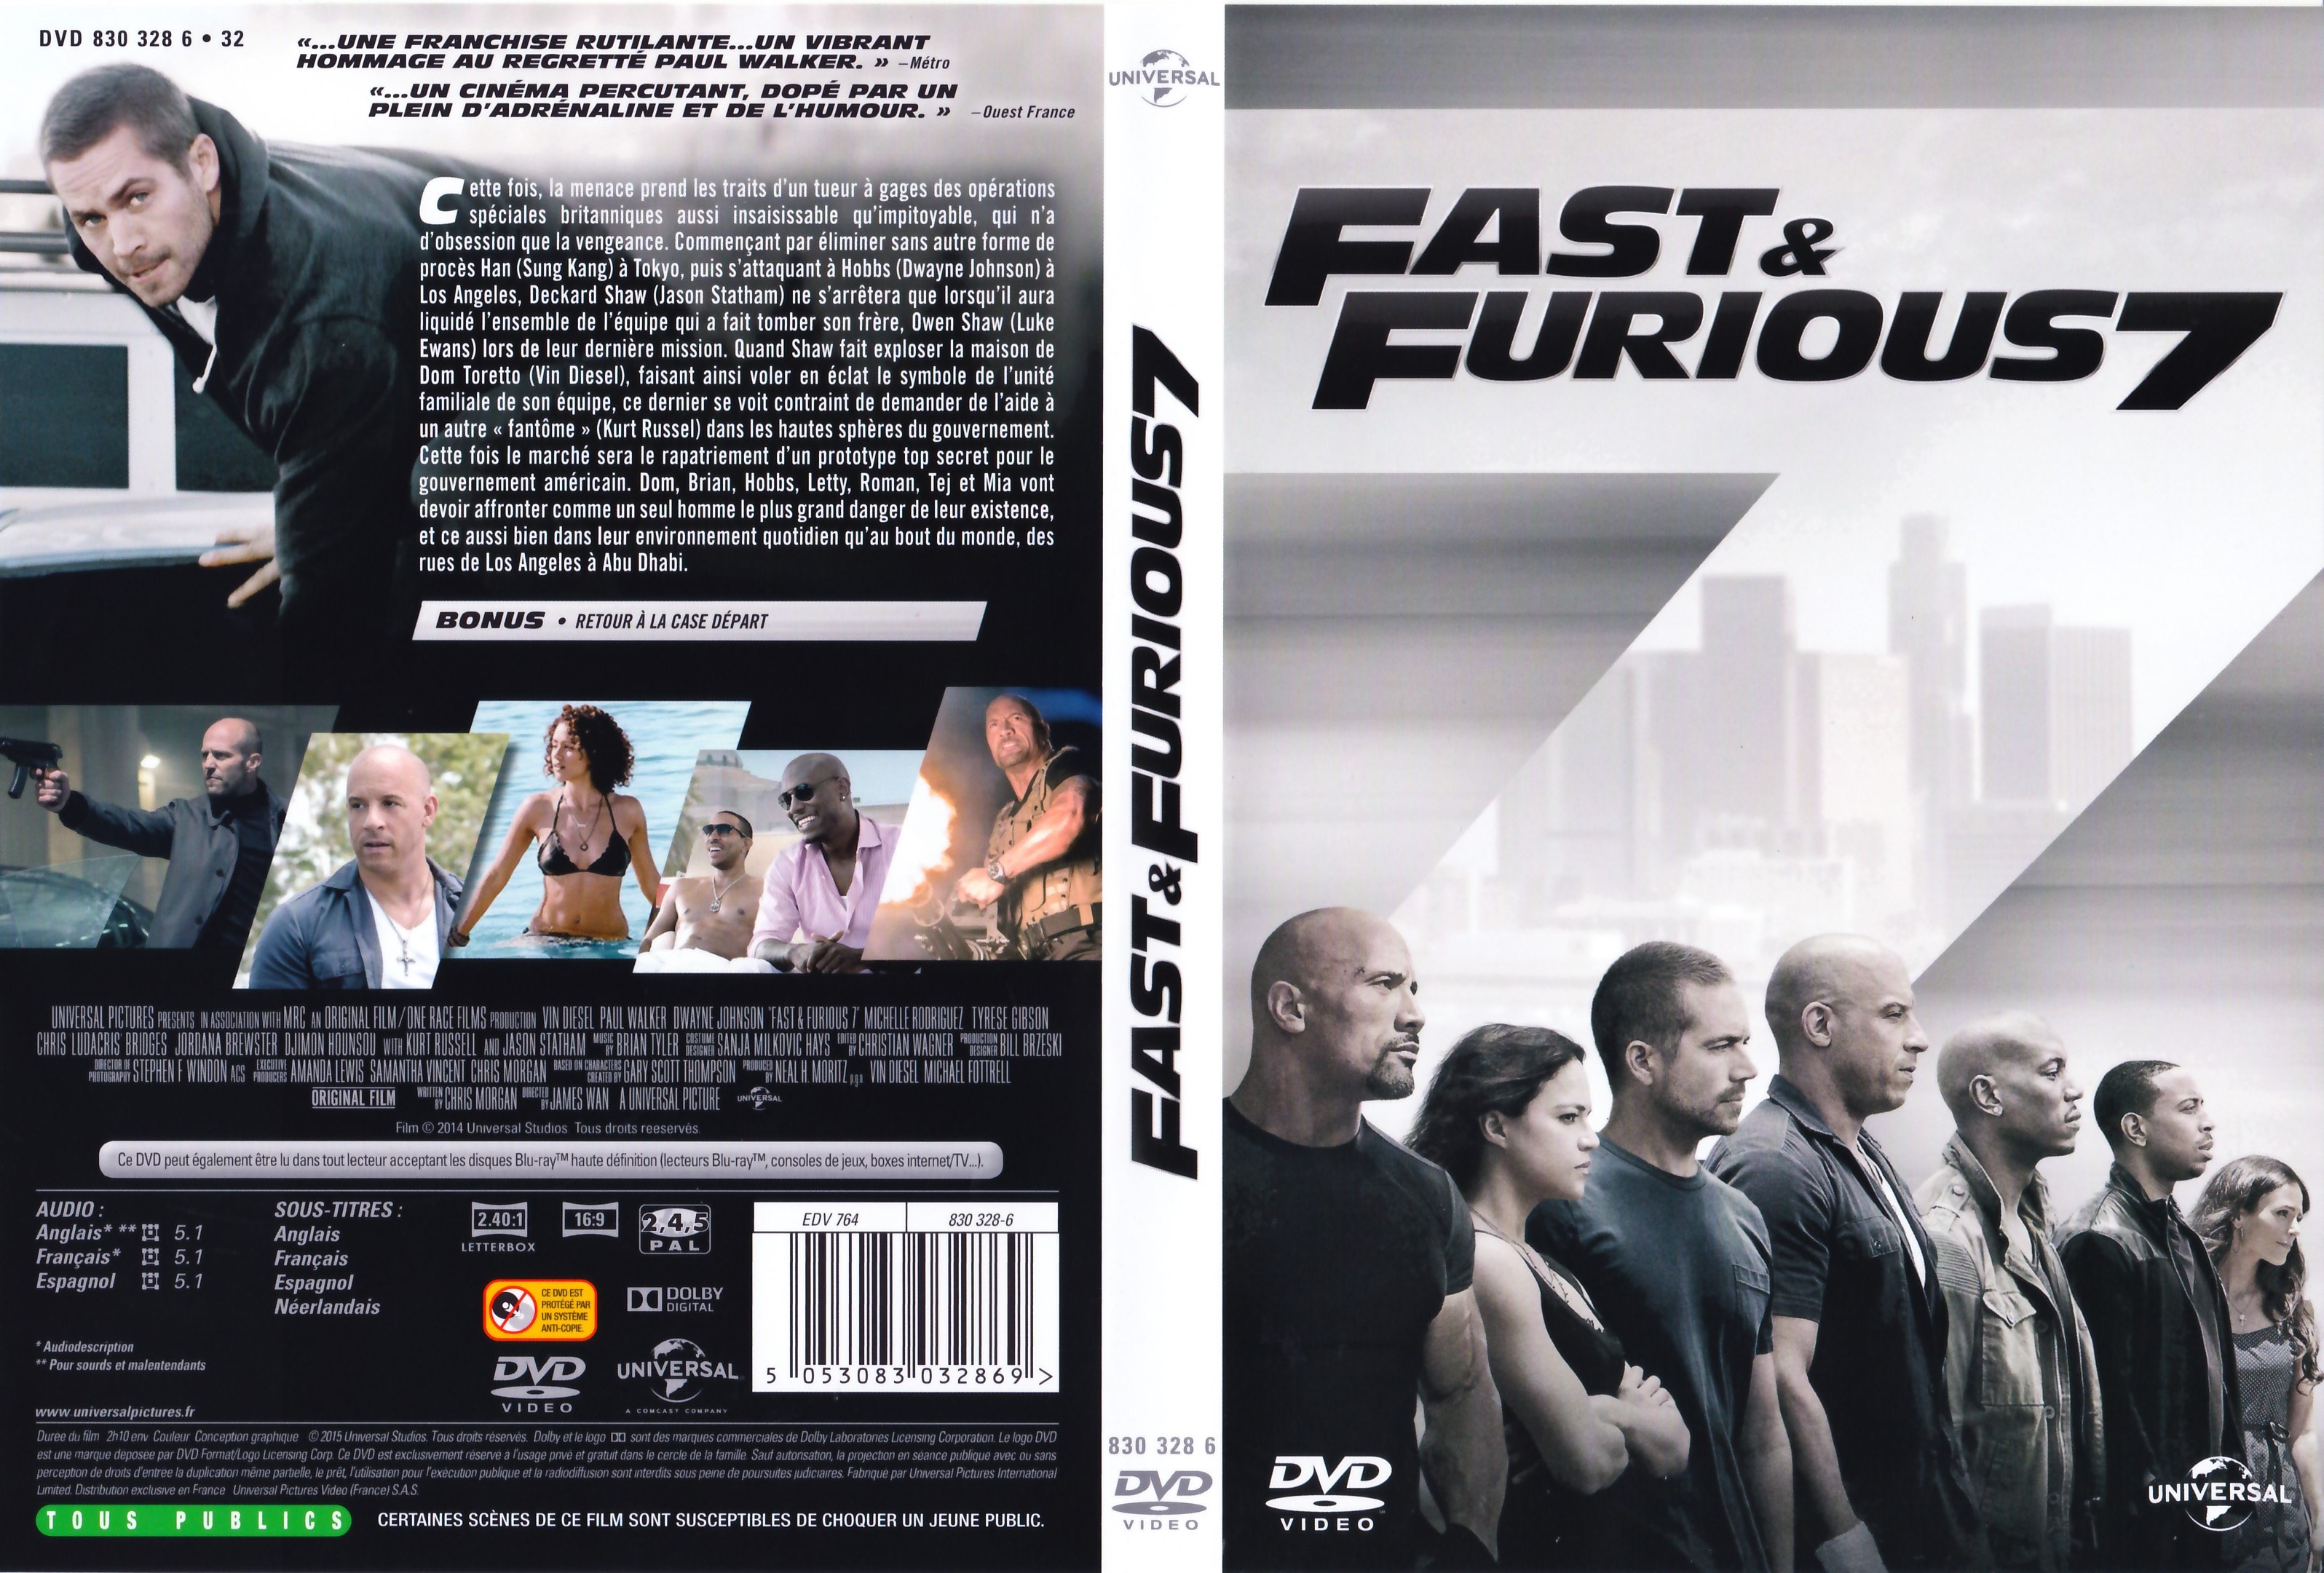 Jaquette DVD Fast & Furious 7